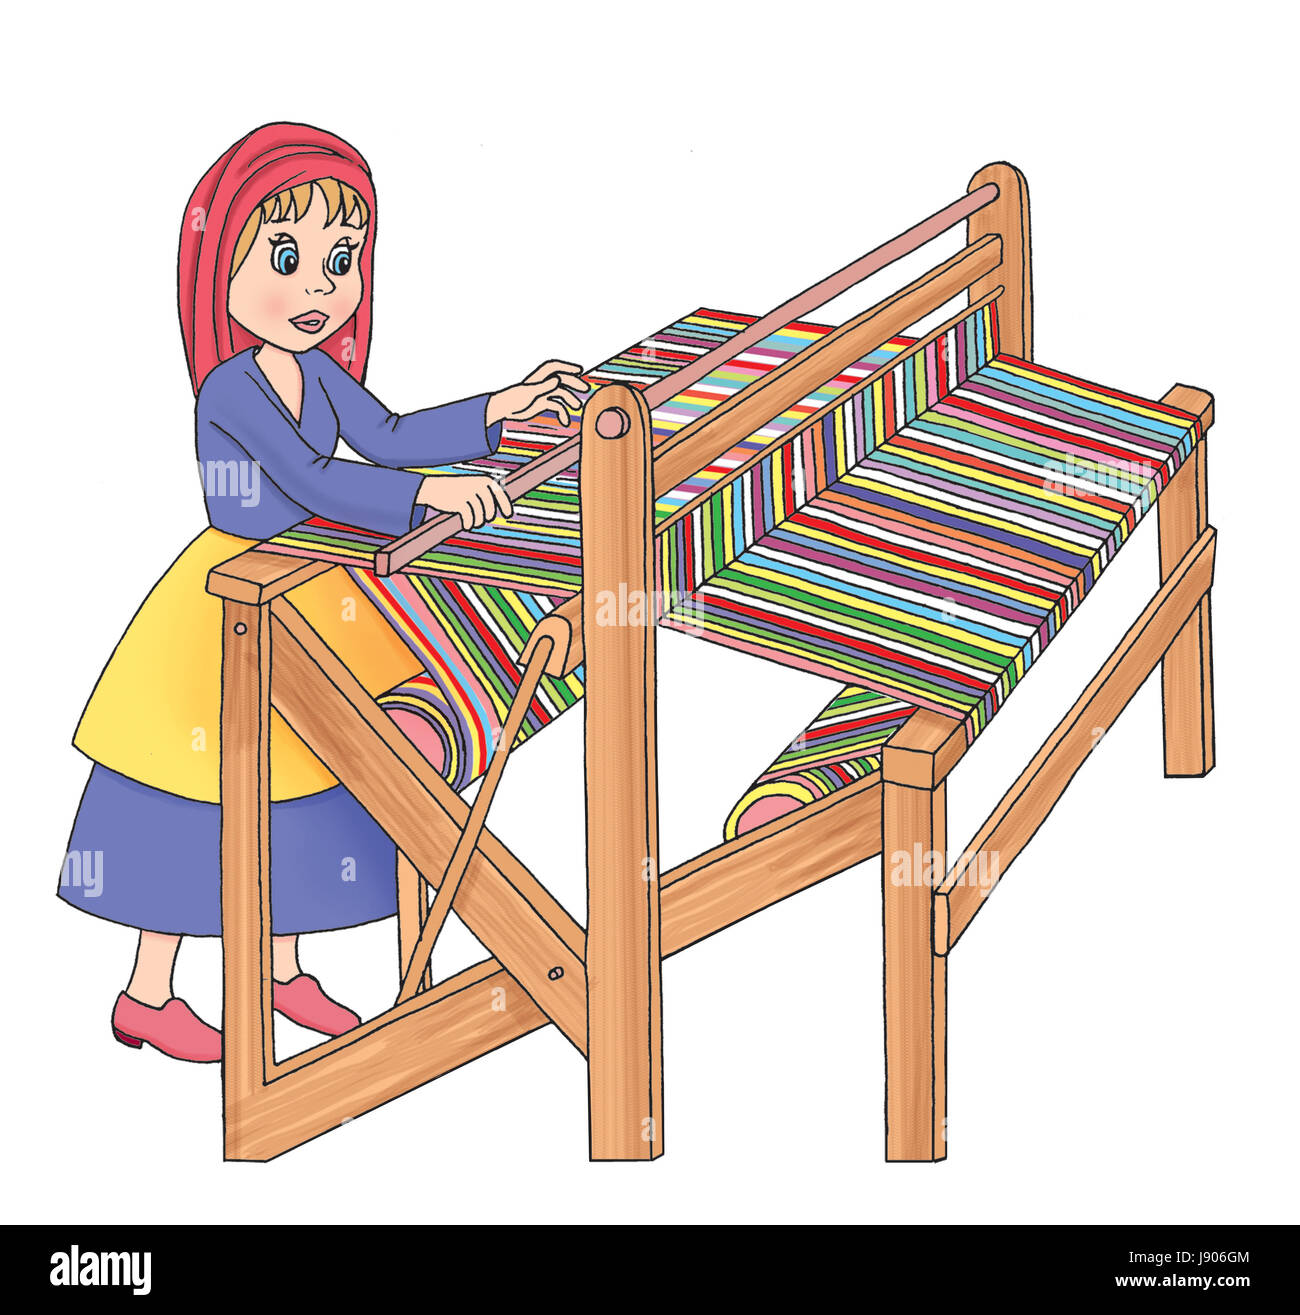 Old wooden loom in weaving a carpet - illustration Stock Photo